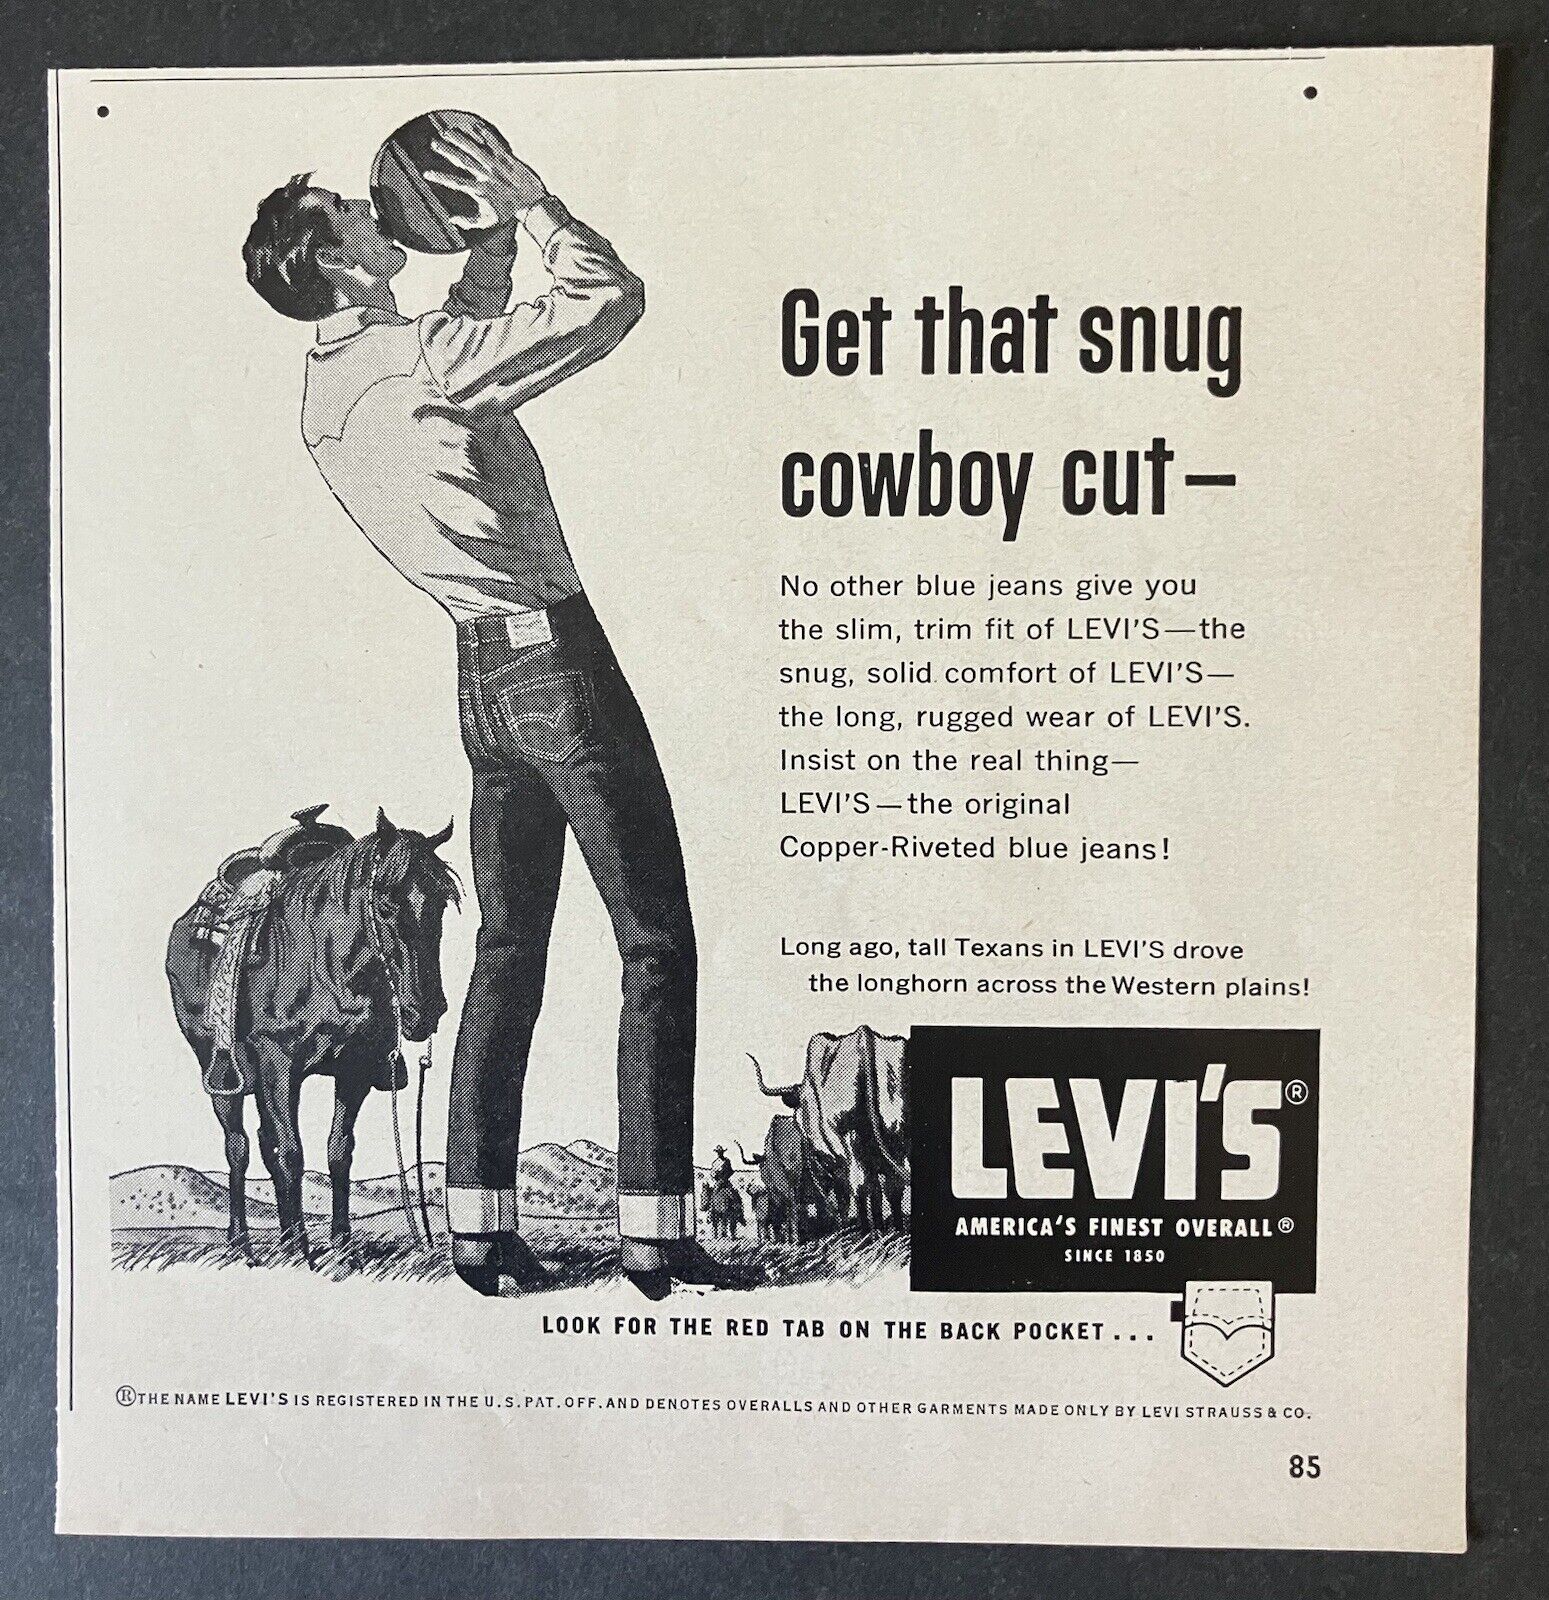 1955 Levi\'s America\'s Finest Overall Snug Cowboy Fit Horse B&W Vintage Print Ad